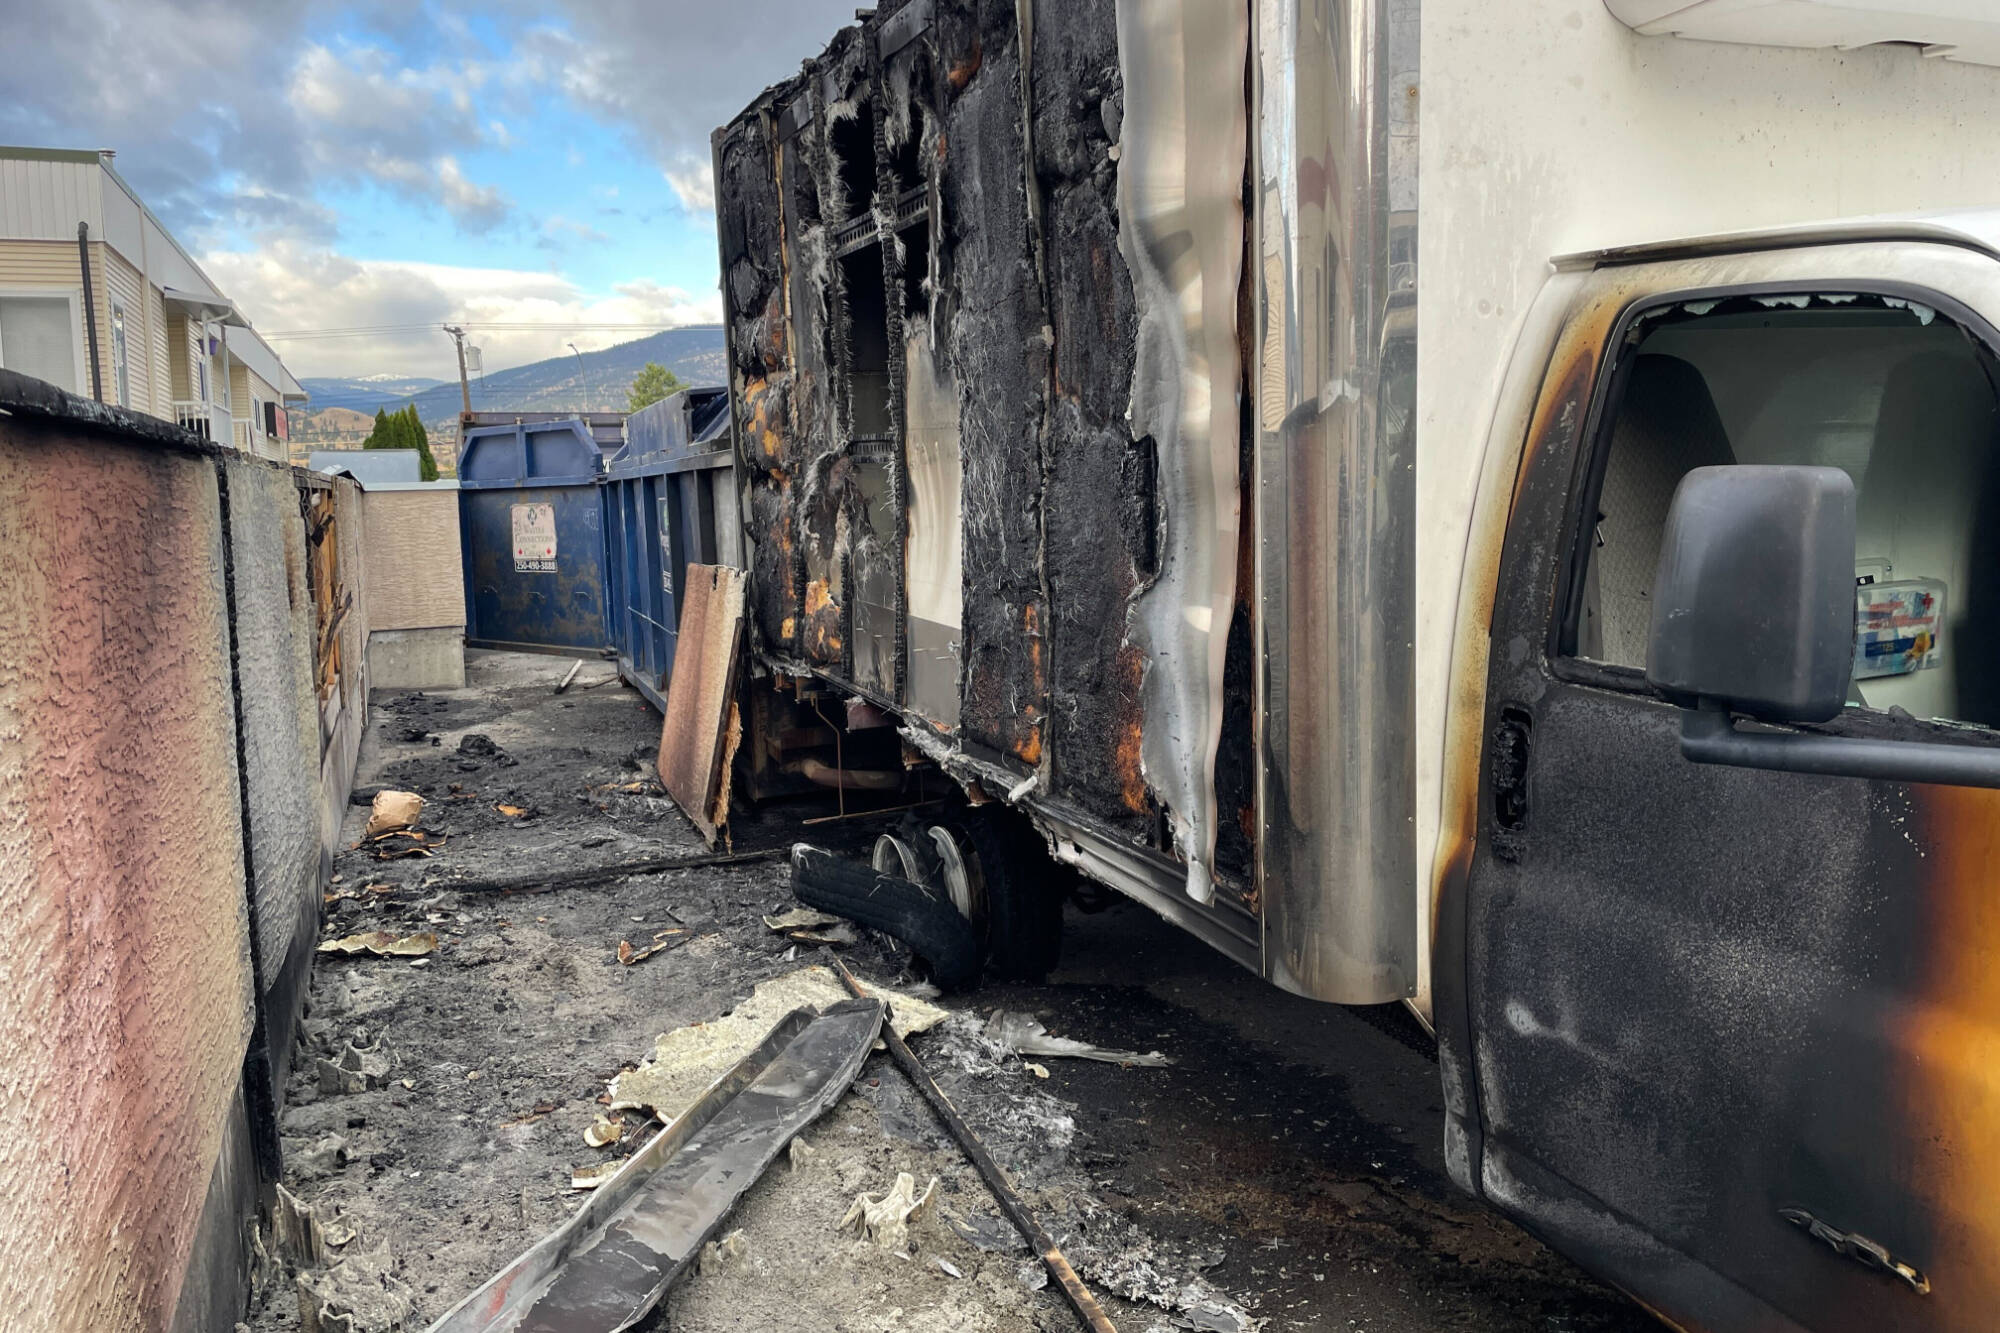 The remains of several storage bins and the Salvation Armys truck after a late night fire in Penticton on Oct. 26. (Brennan Phillips - Western News)